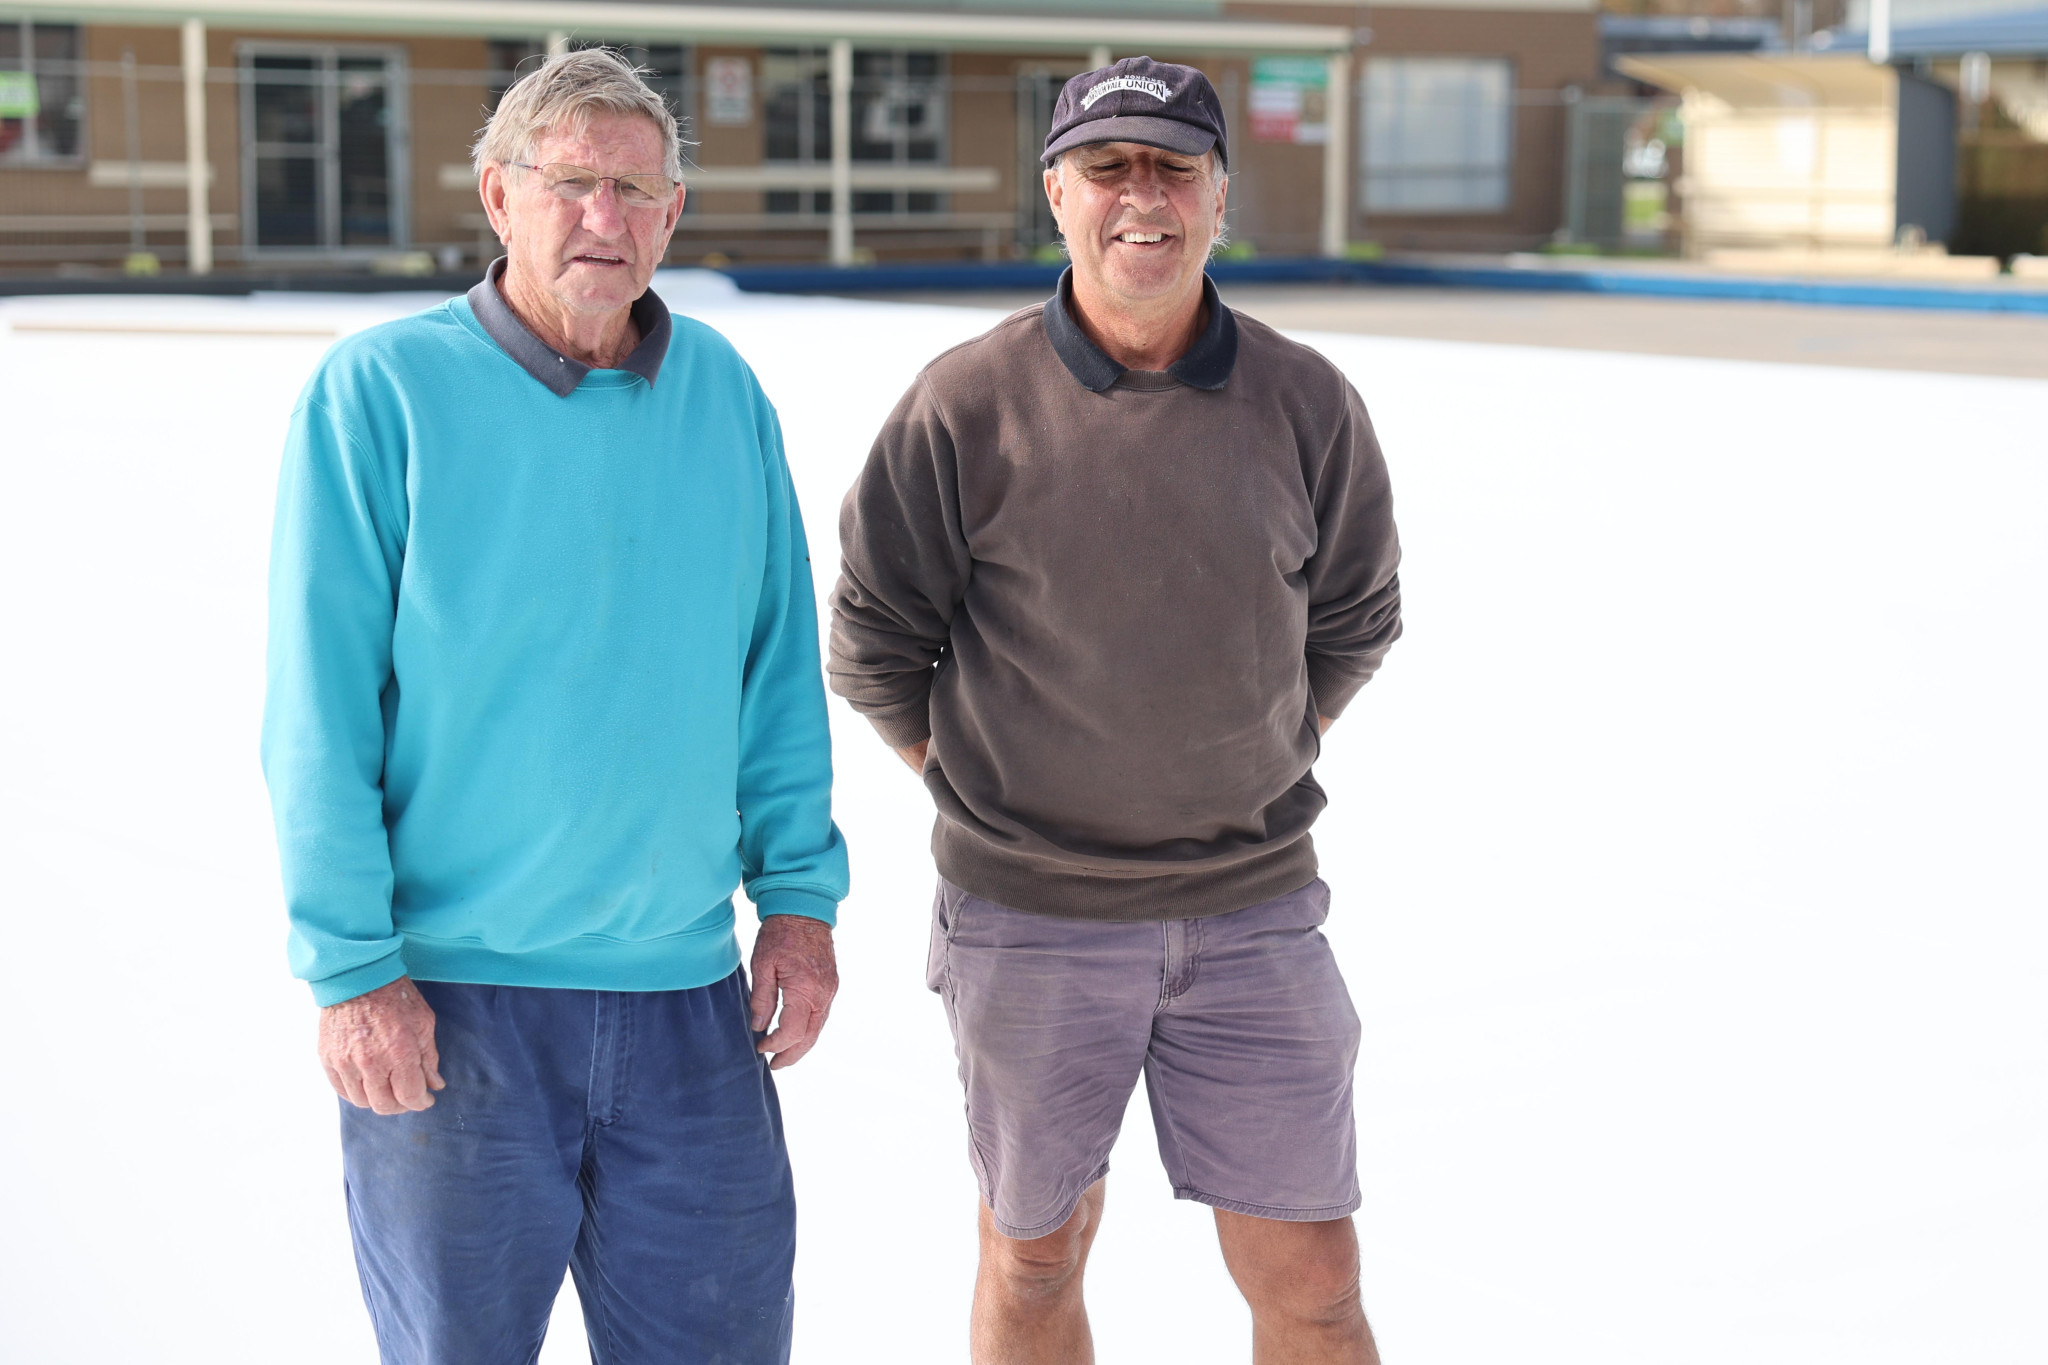 Camperdown Bowling Club member Barry Atchison (left) and vice-president Harry Van Someren were excited to see work on the new green progress earlier this week.